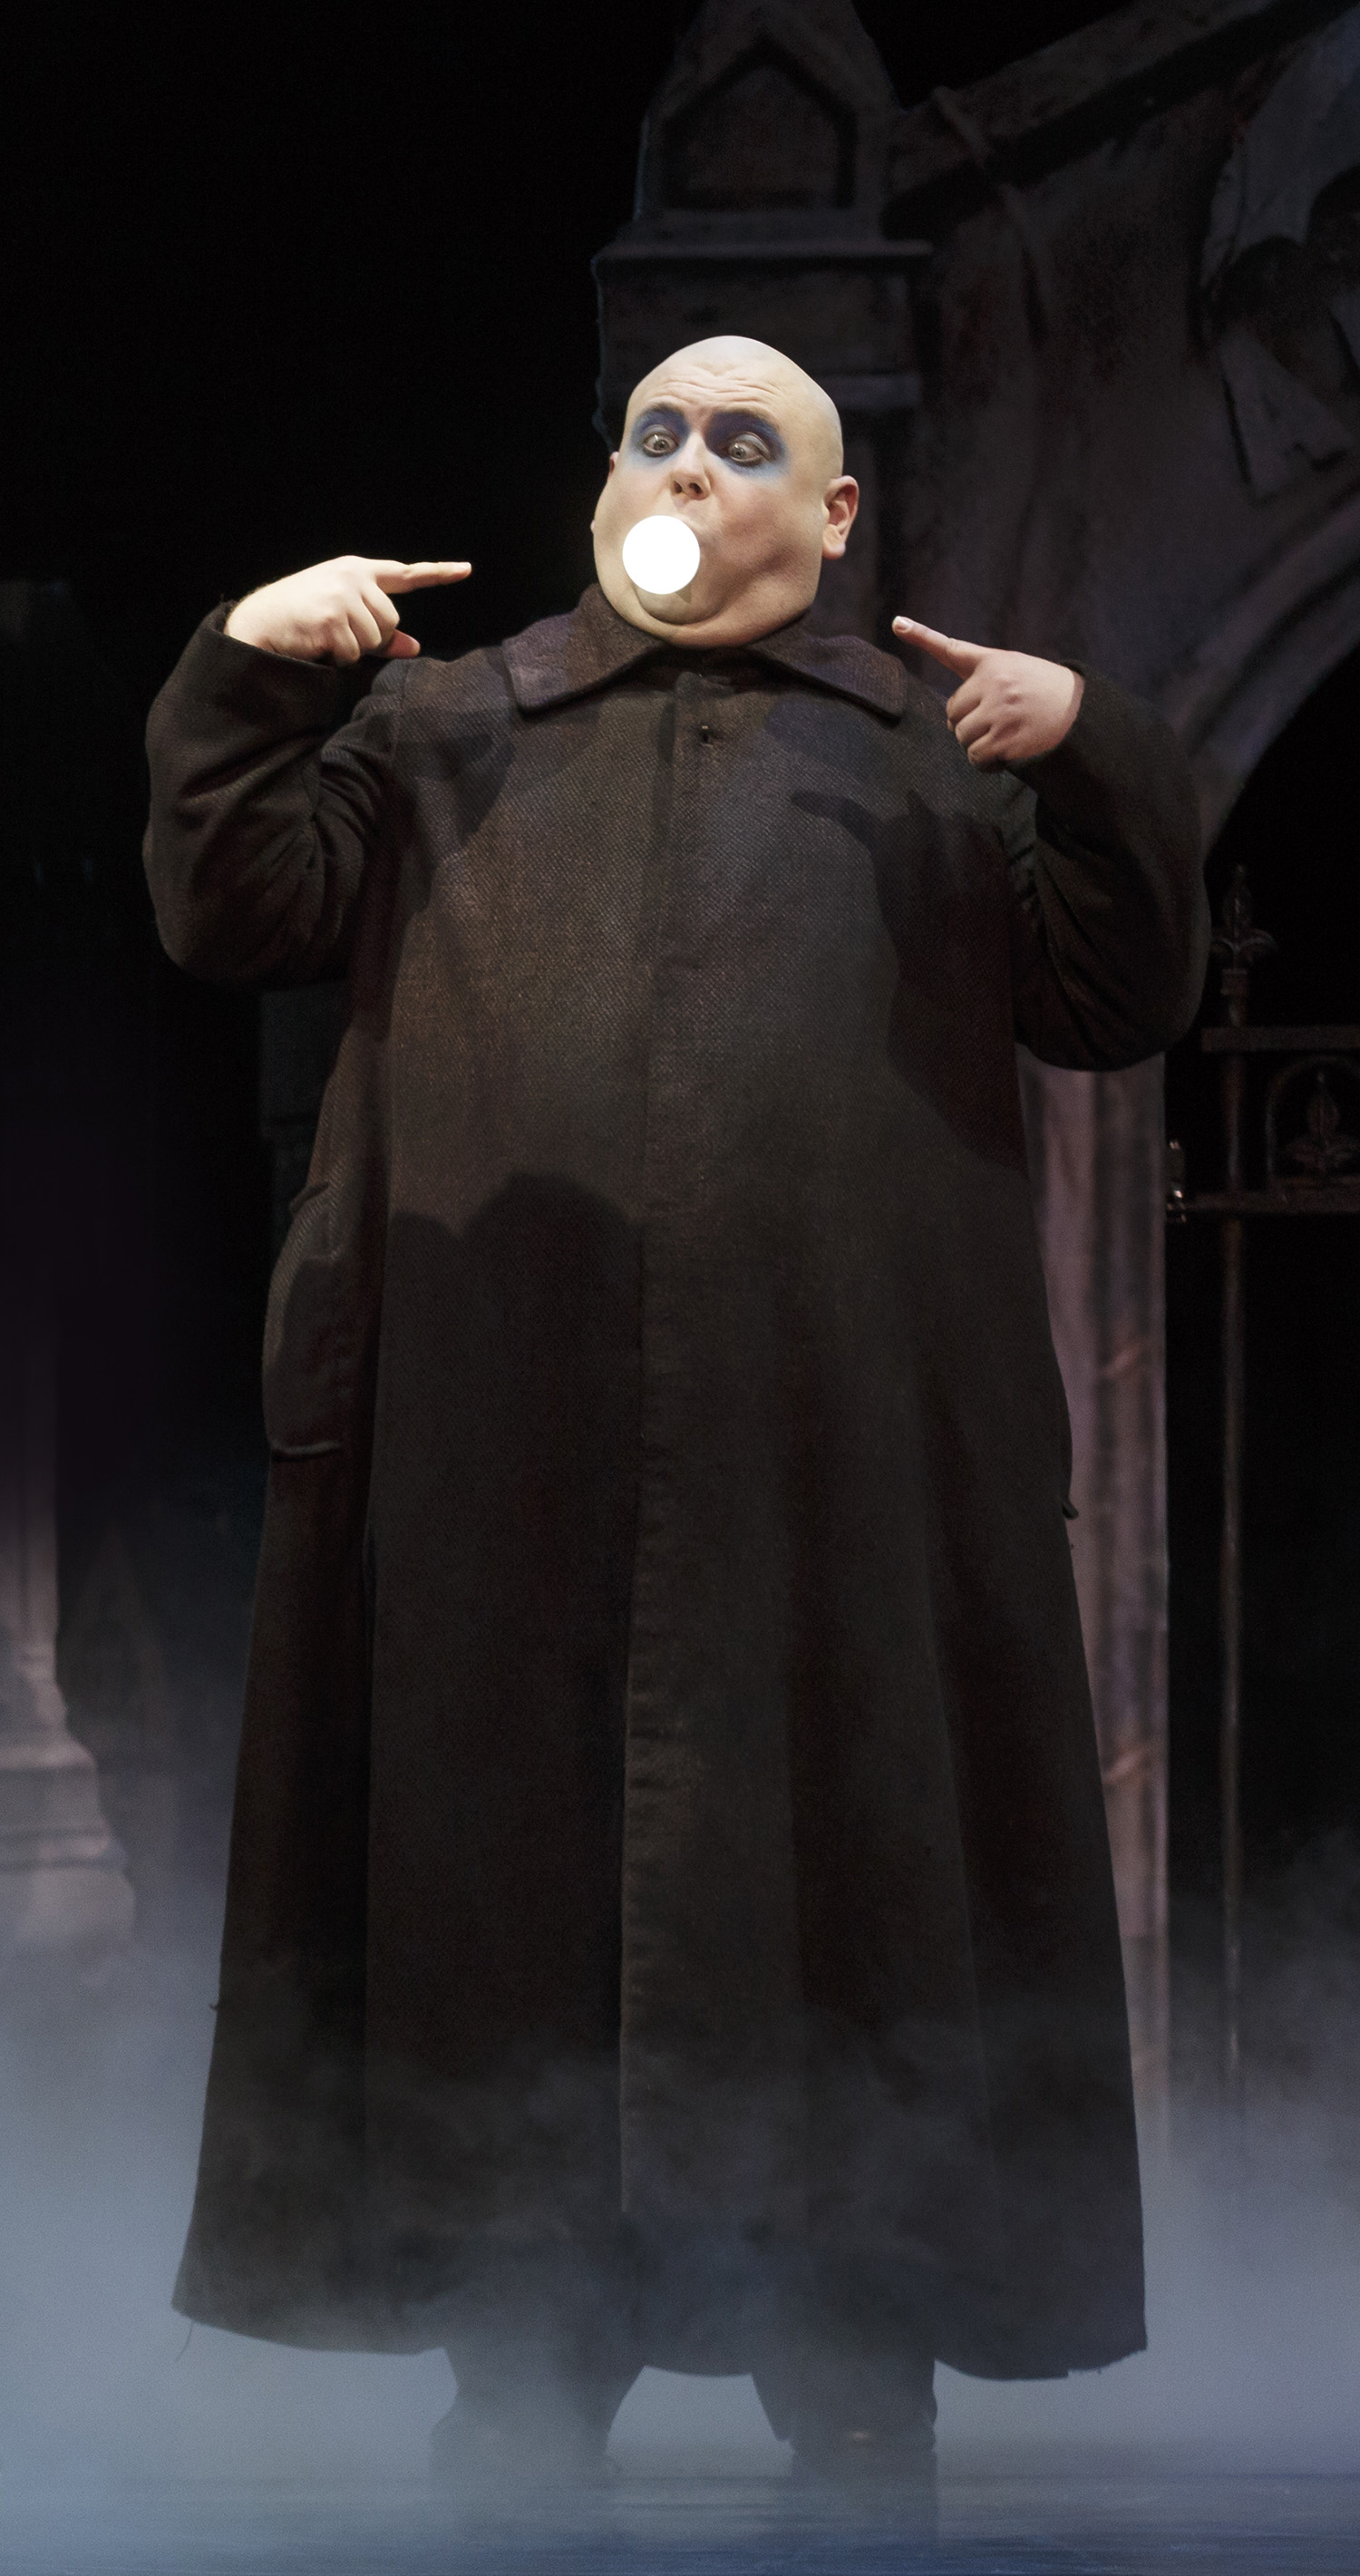 Shaun Rice as Uncle Fester. Photo by Carol Rosegg.